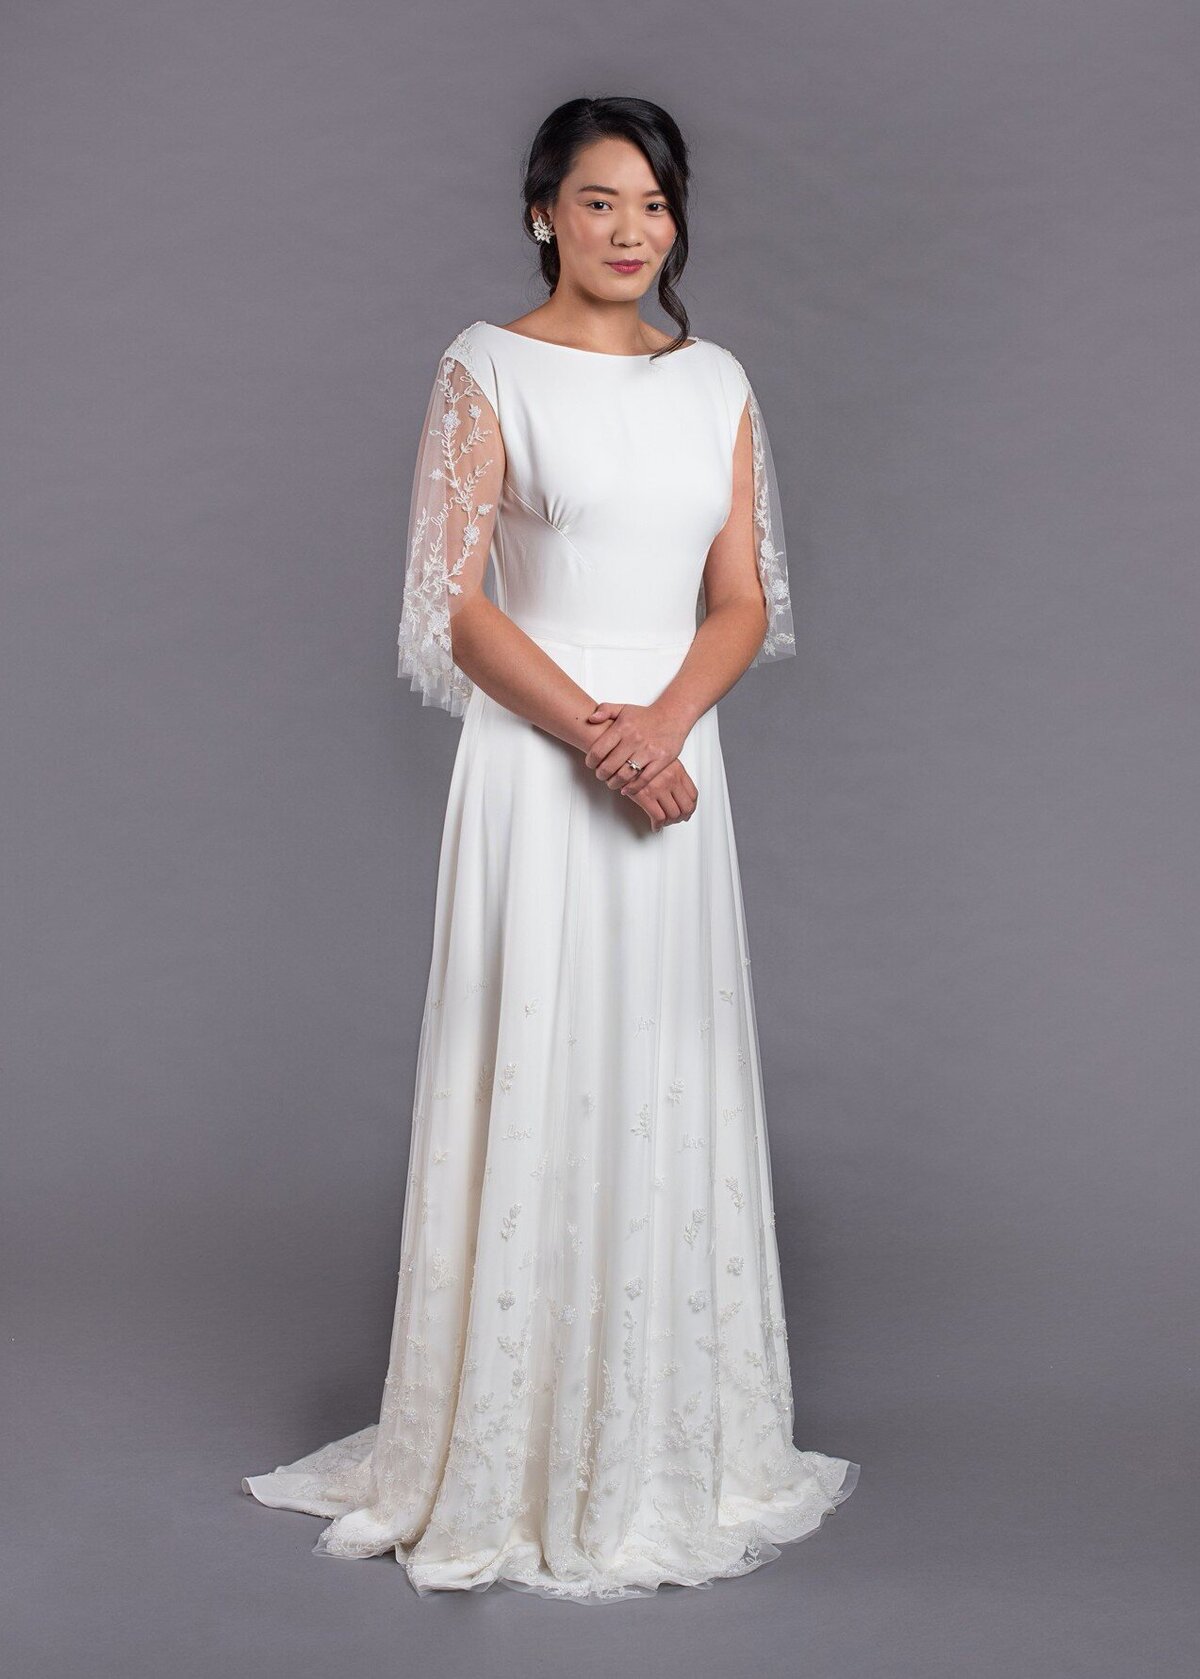 The Dolores style is a slim a-line wedding dress with a beaded bridal capelet by indie bridal designer Edith Elan.